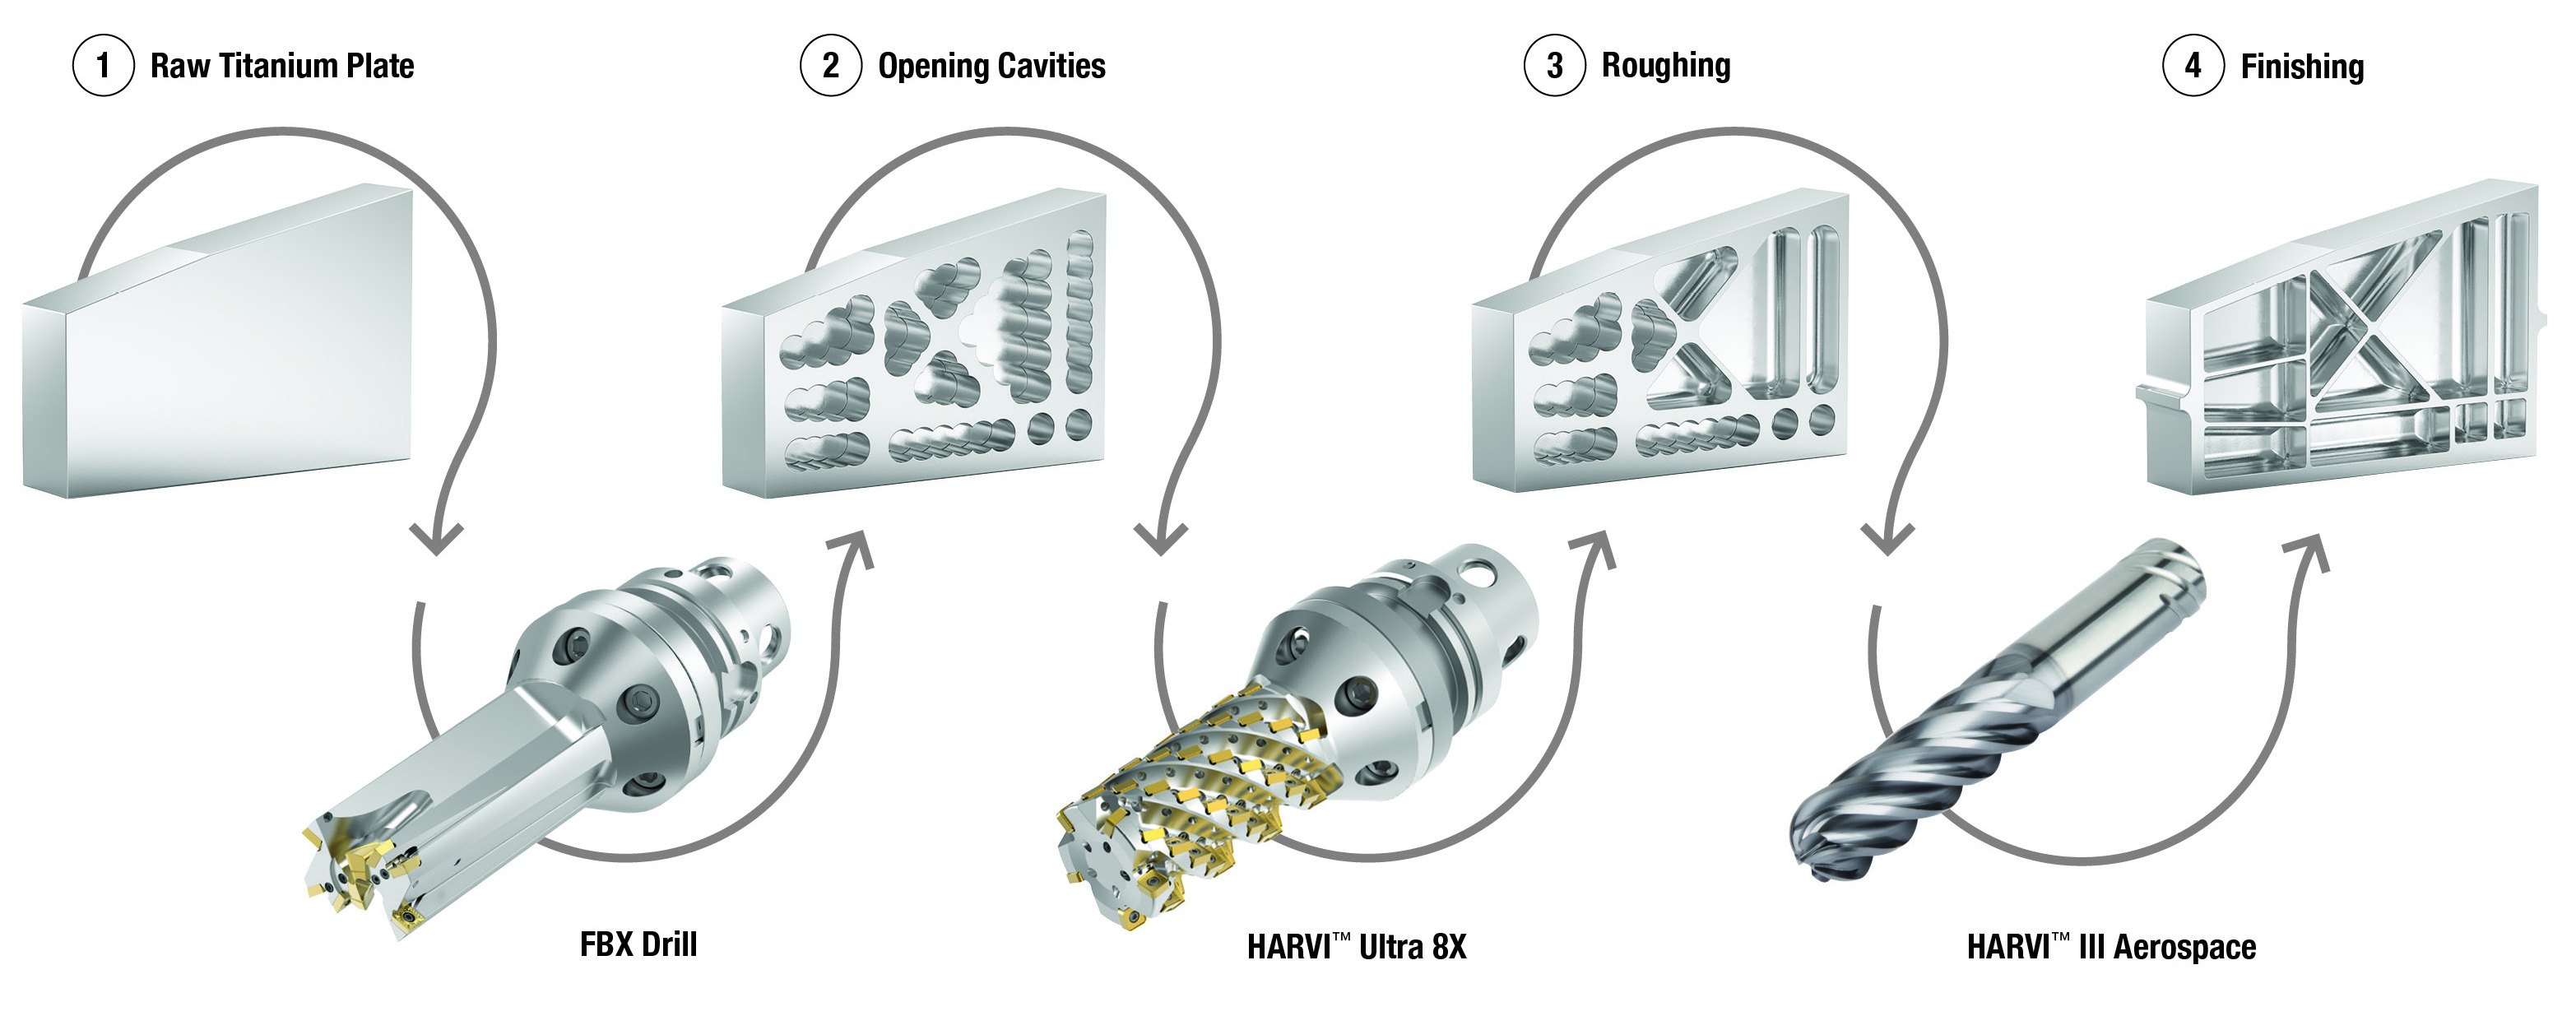 The FBX drill is ideal for roughing out pockets in a metal workpiece by chain drilling, which leaves scalloped edges. Metalworkers can then turn to the Harvi Ultra 8X indexable mill for smoothing out the scallops and semi-finishing and use the Harvi III solid carbide end mill to finish the workpiece’s floors and walls.